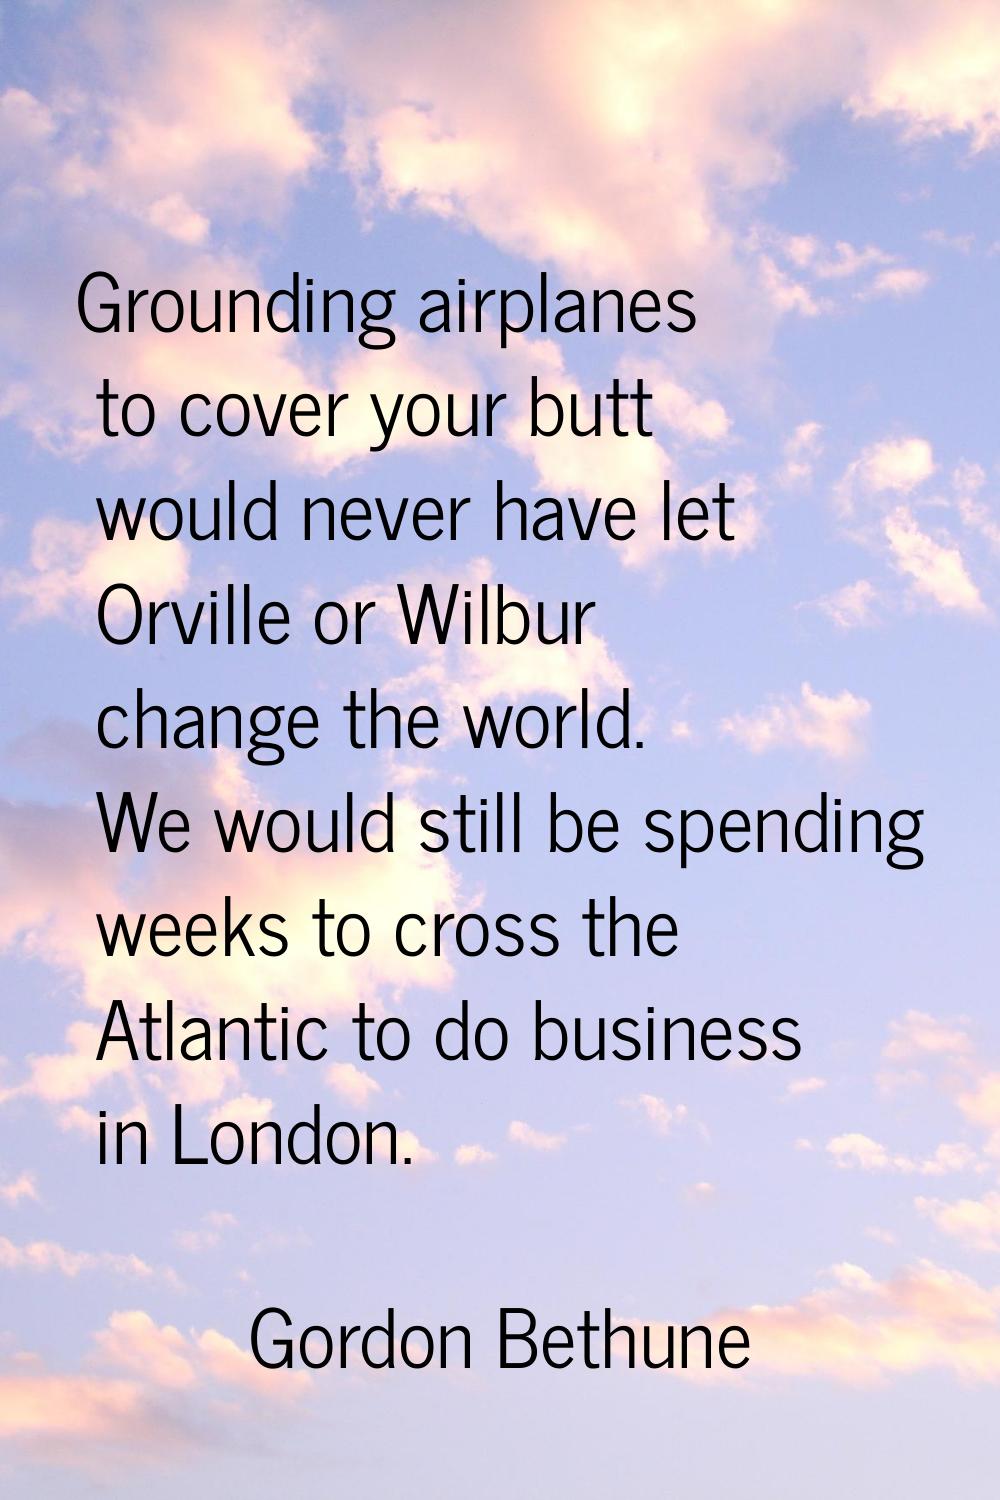 Grounding airplanes to cover your butt would never have let Orville or Wilbur change the world. We 